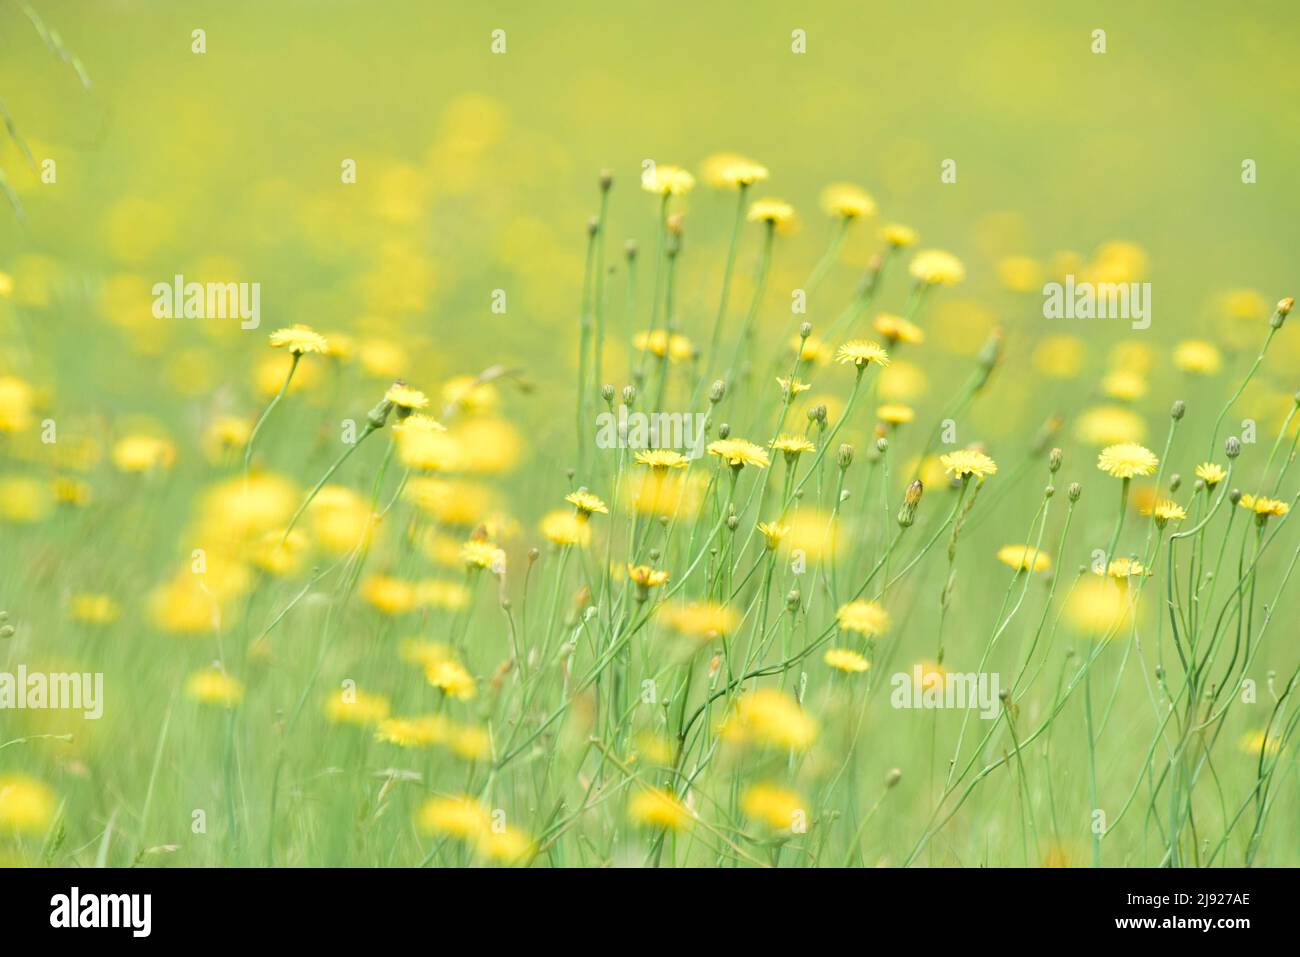 Wild flora, flowers in spring in the Pampas landscape, La Pampa province, Patagonia, Argentina Stock Photo